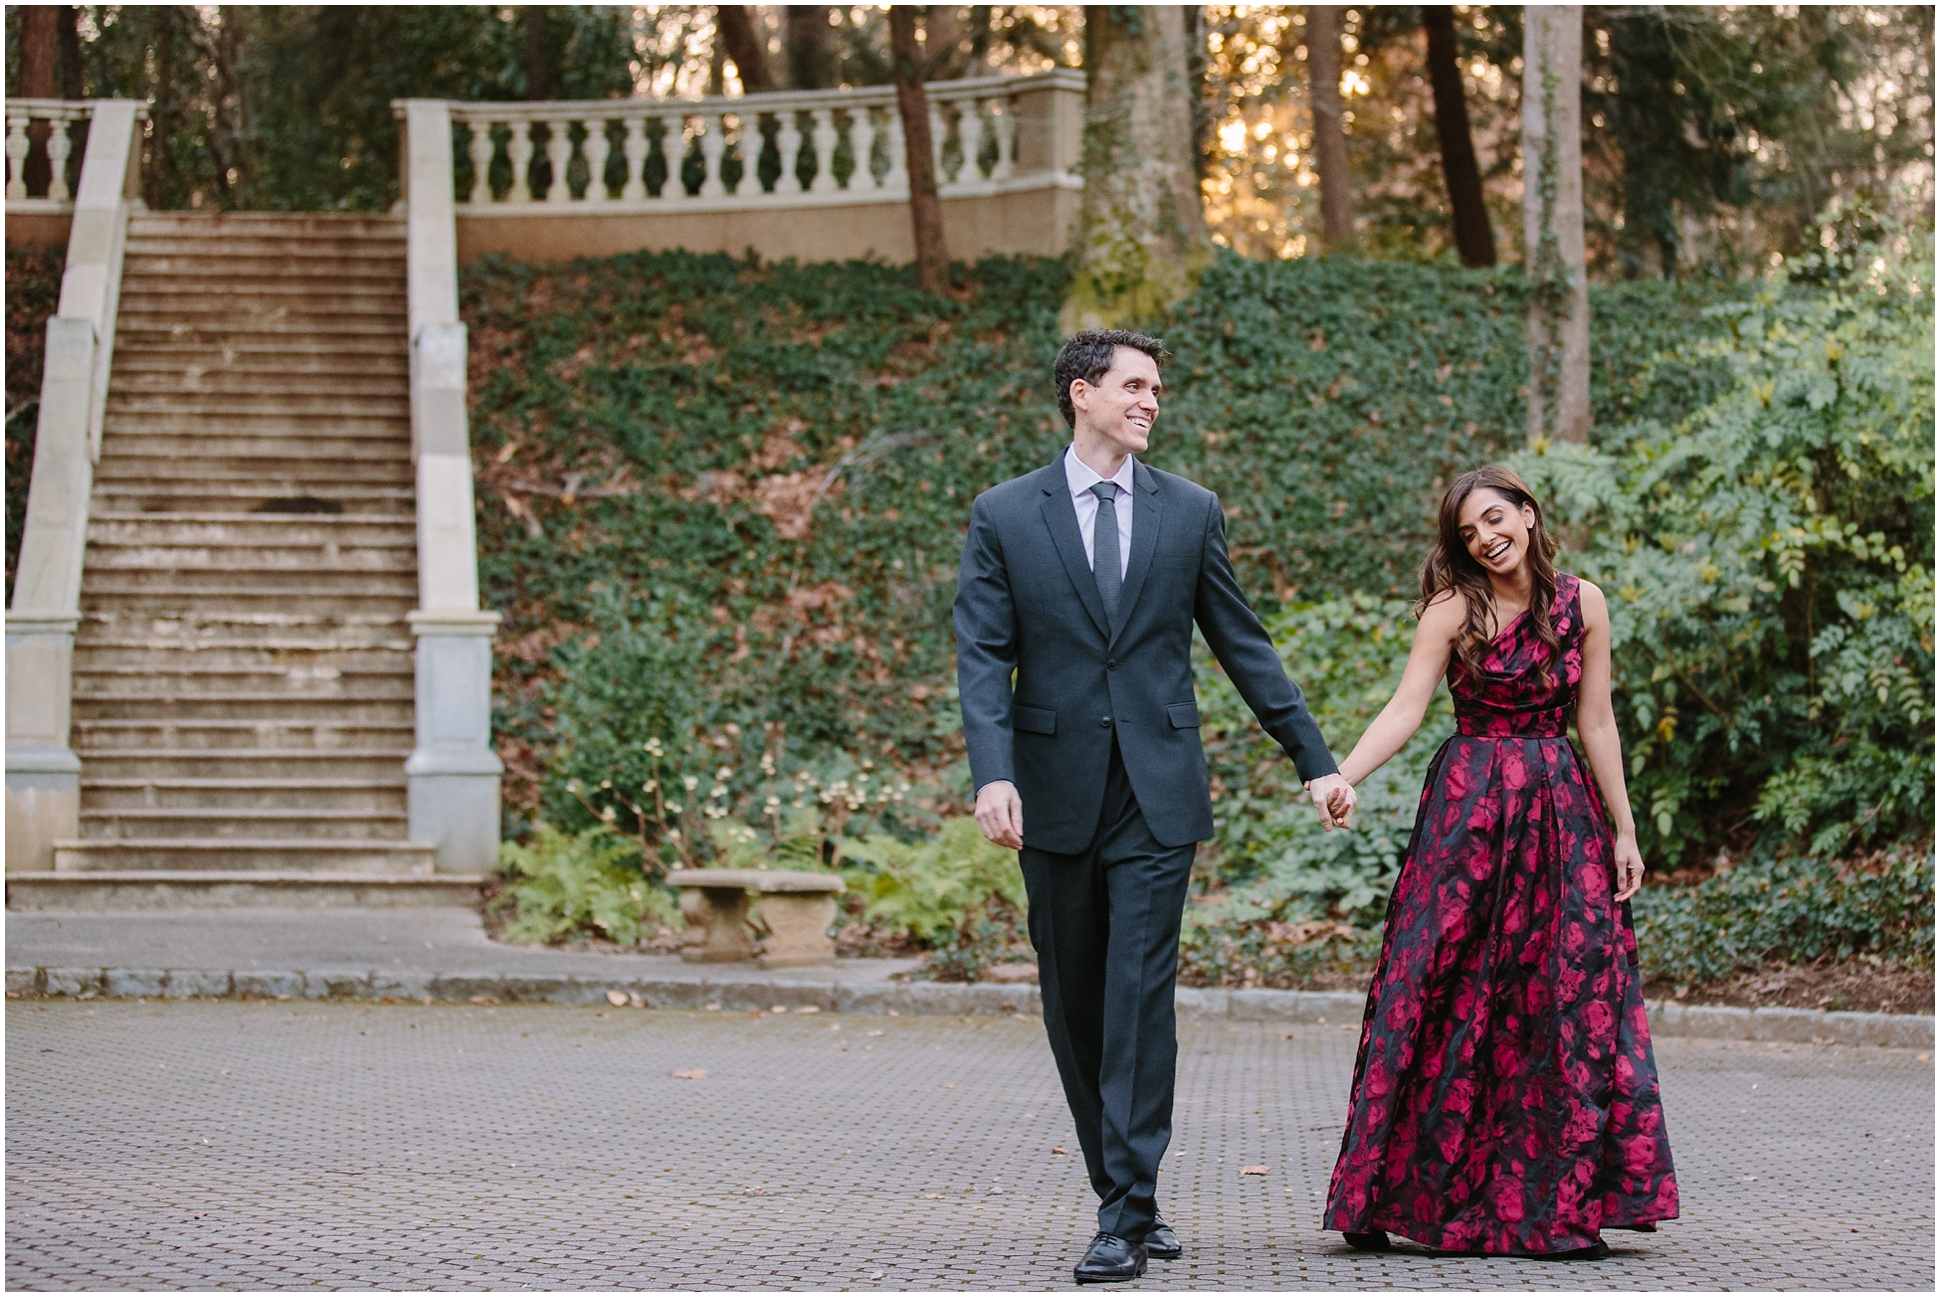 A Romantic Cator Woolford Engagement Session | Atlanta, Georgia Wedding Photographers | Two Chics Photography | www.twochicsphotography.com